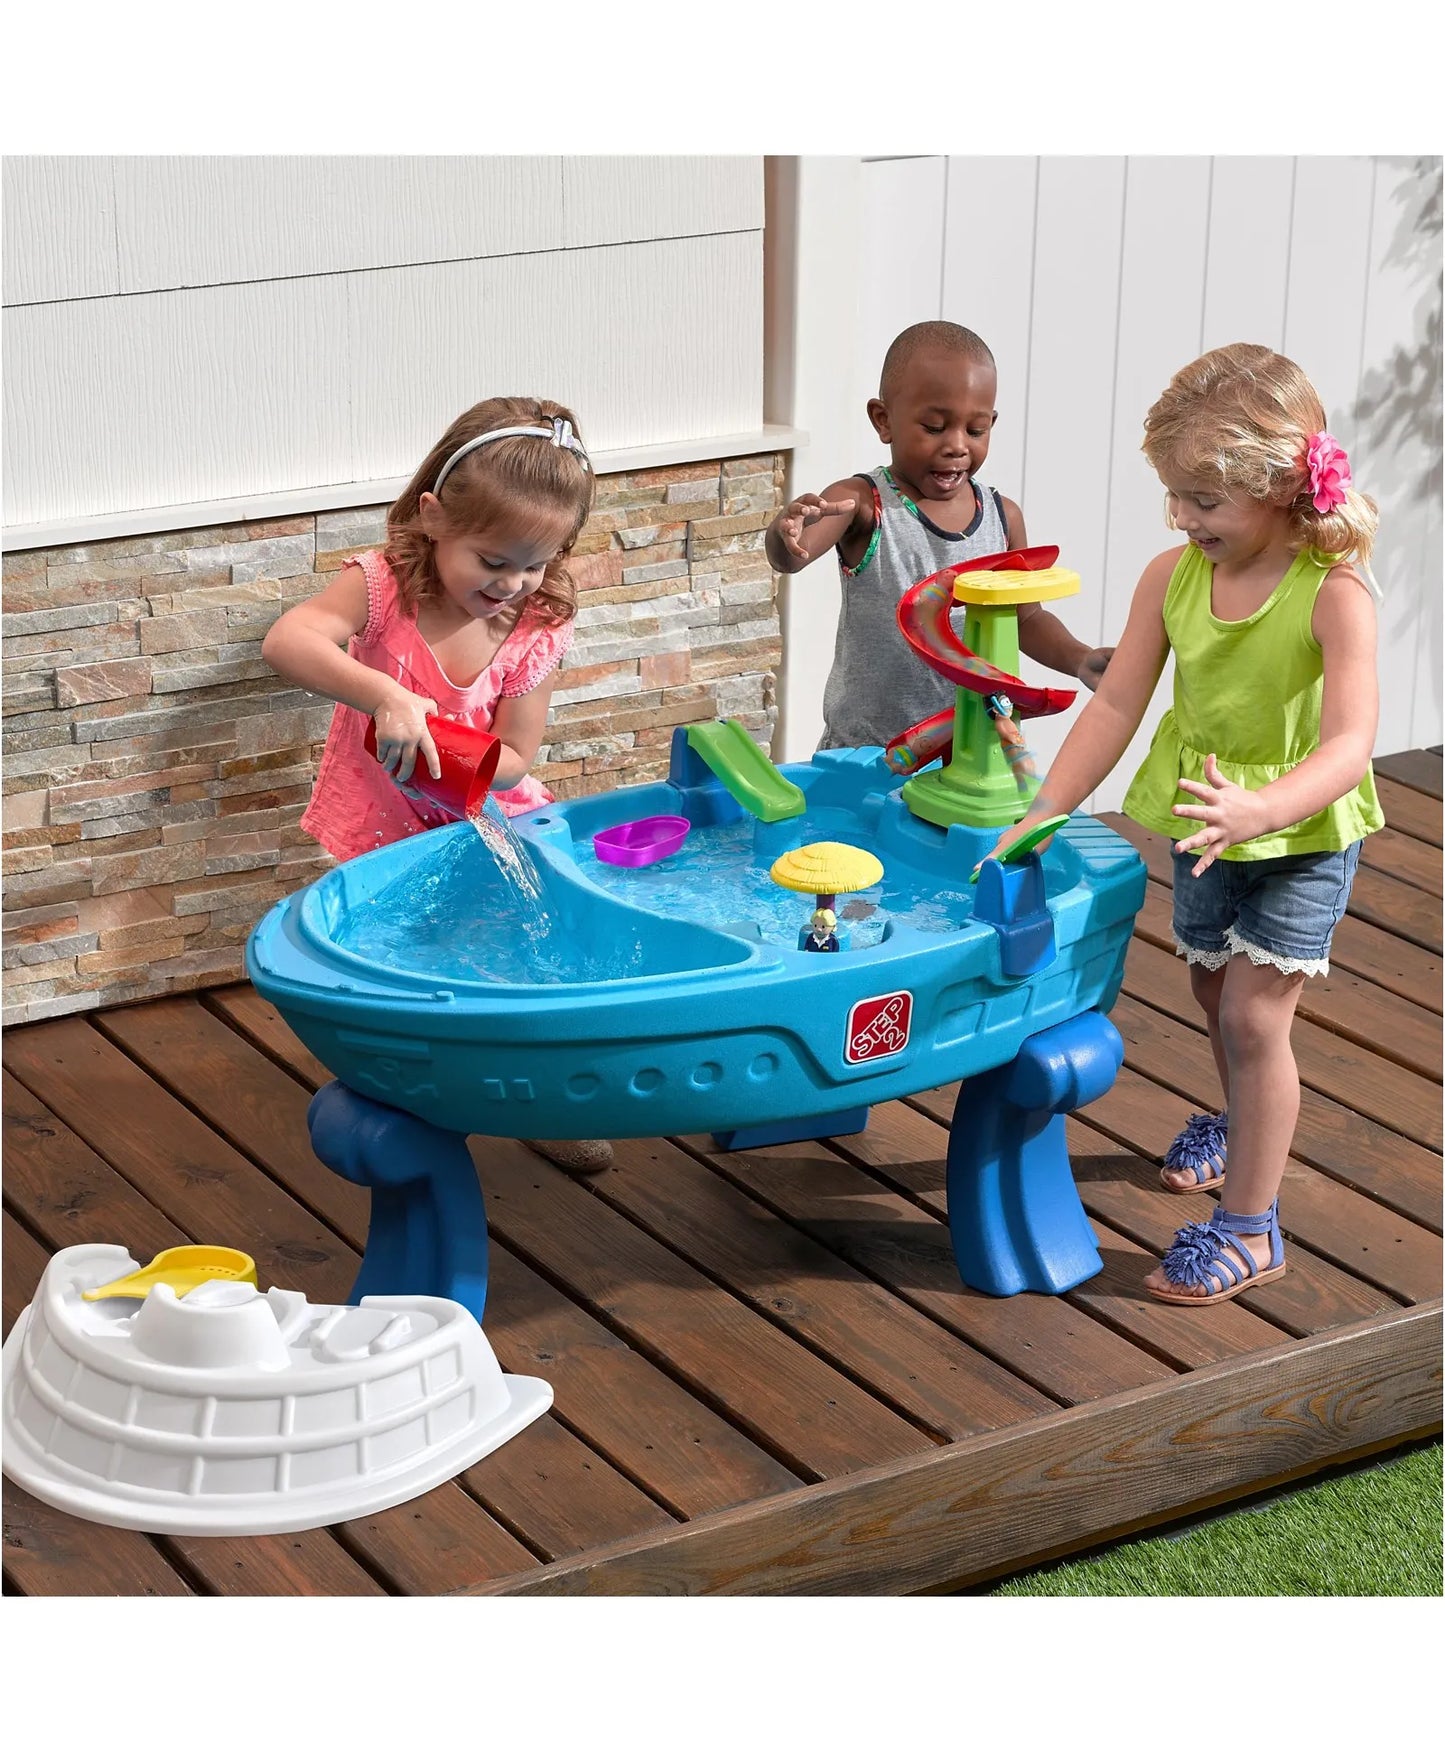 Step2 Fiesta Cruise Sand & Water Table